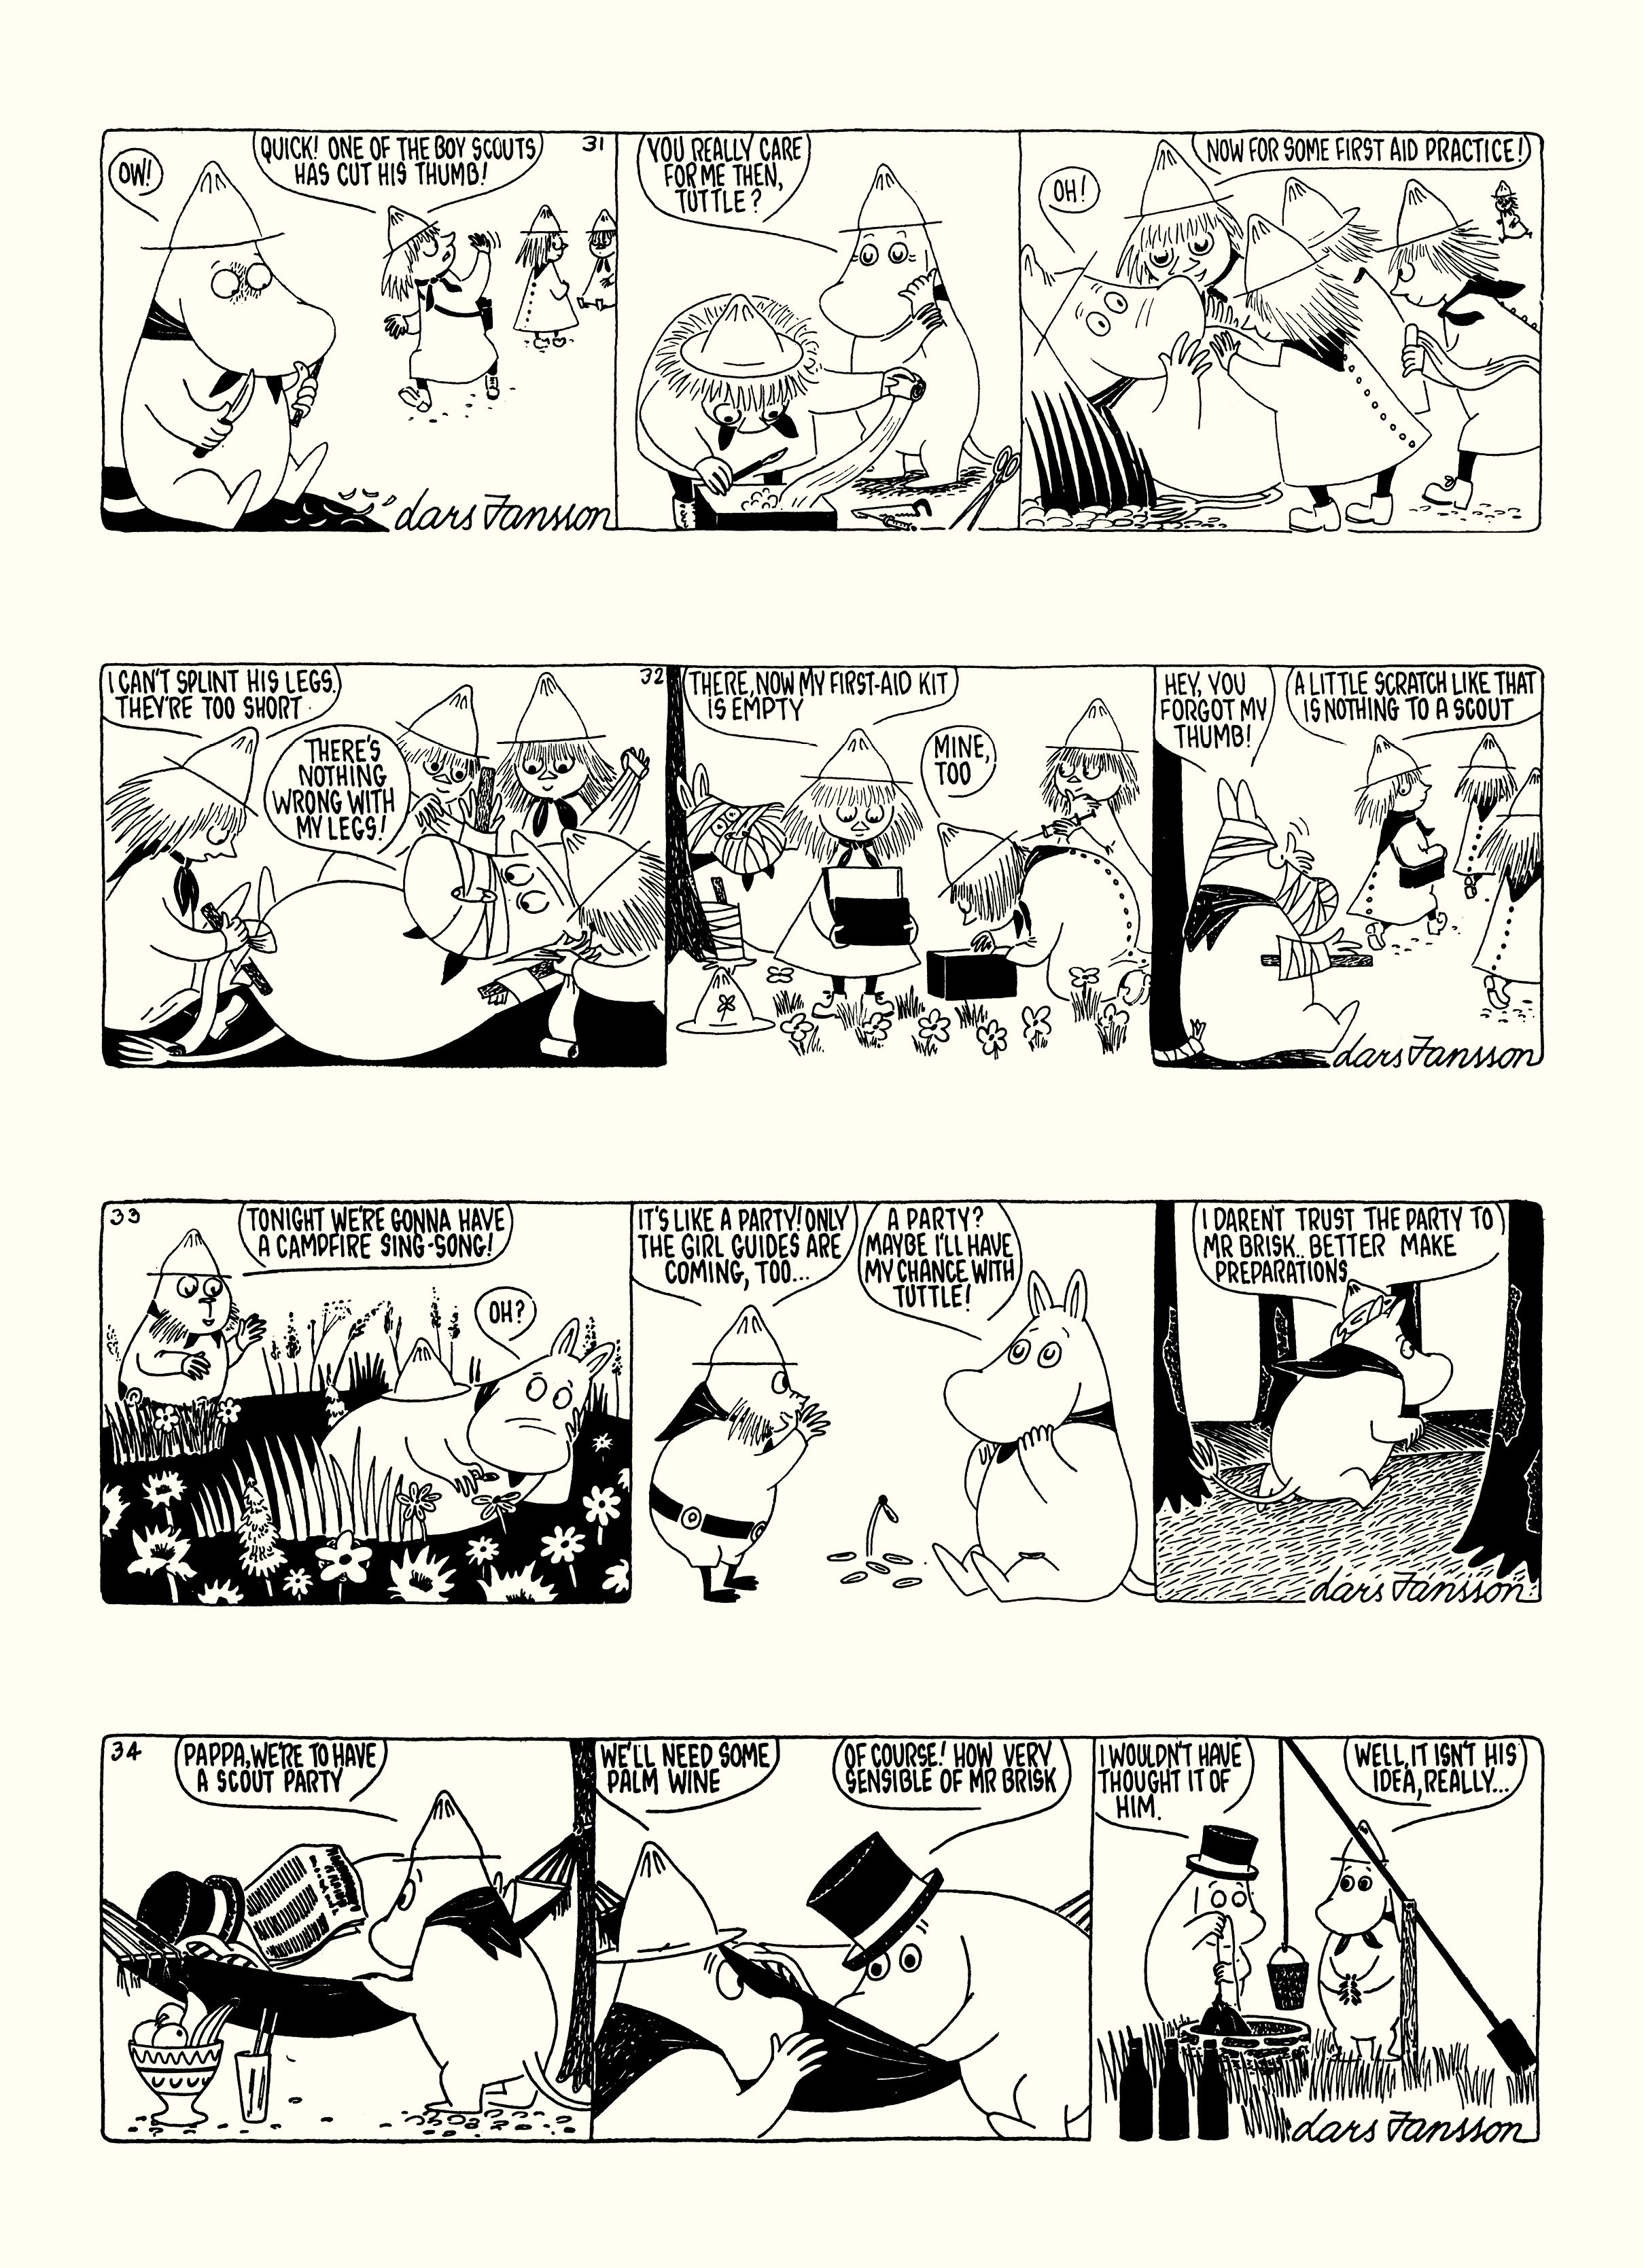 Read online Moomin: The Complete Lars Jansson Comic Strip comic -  Issue # TPB 7 - 35